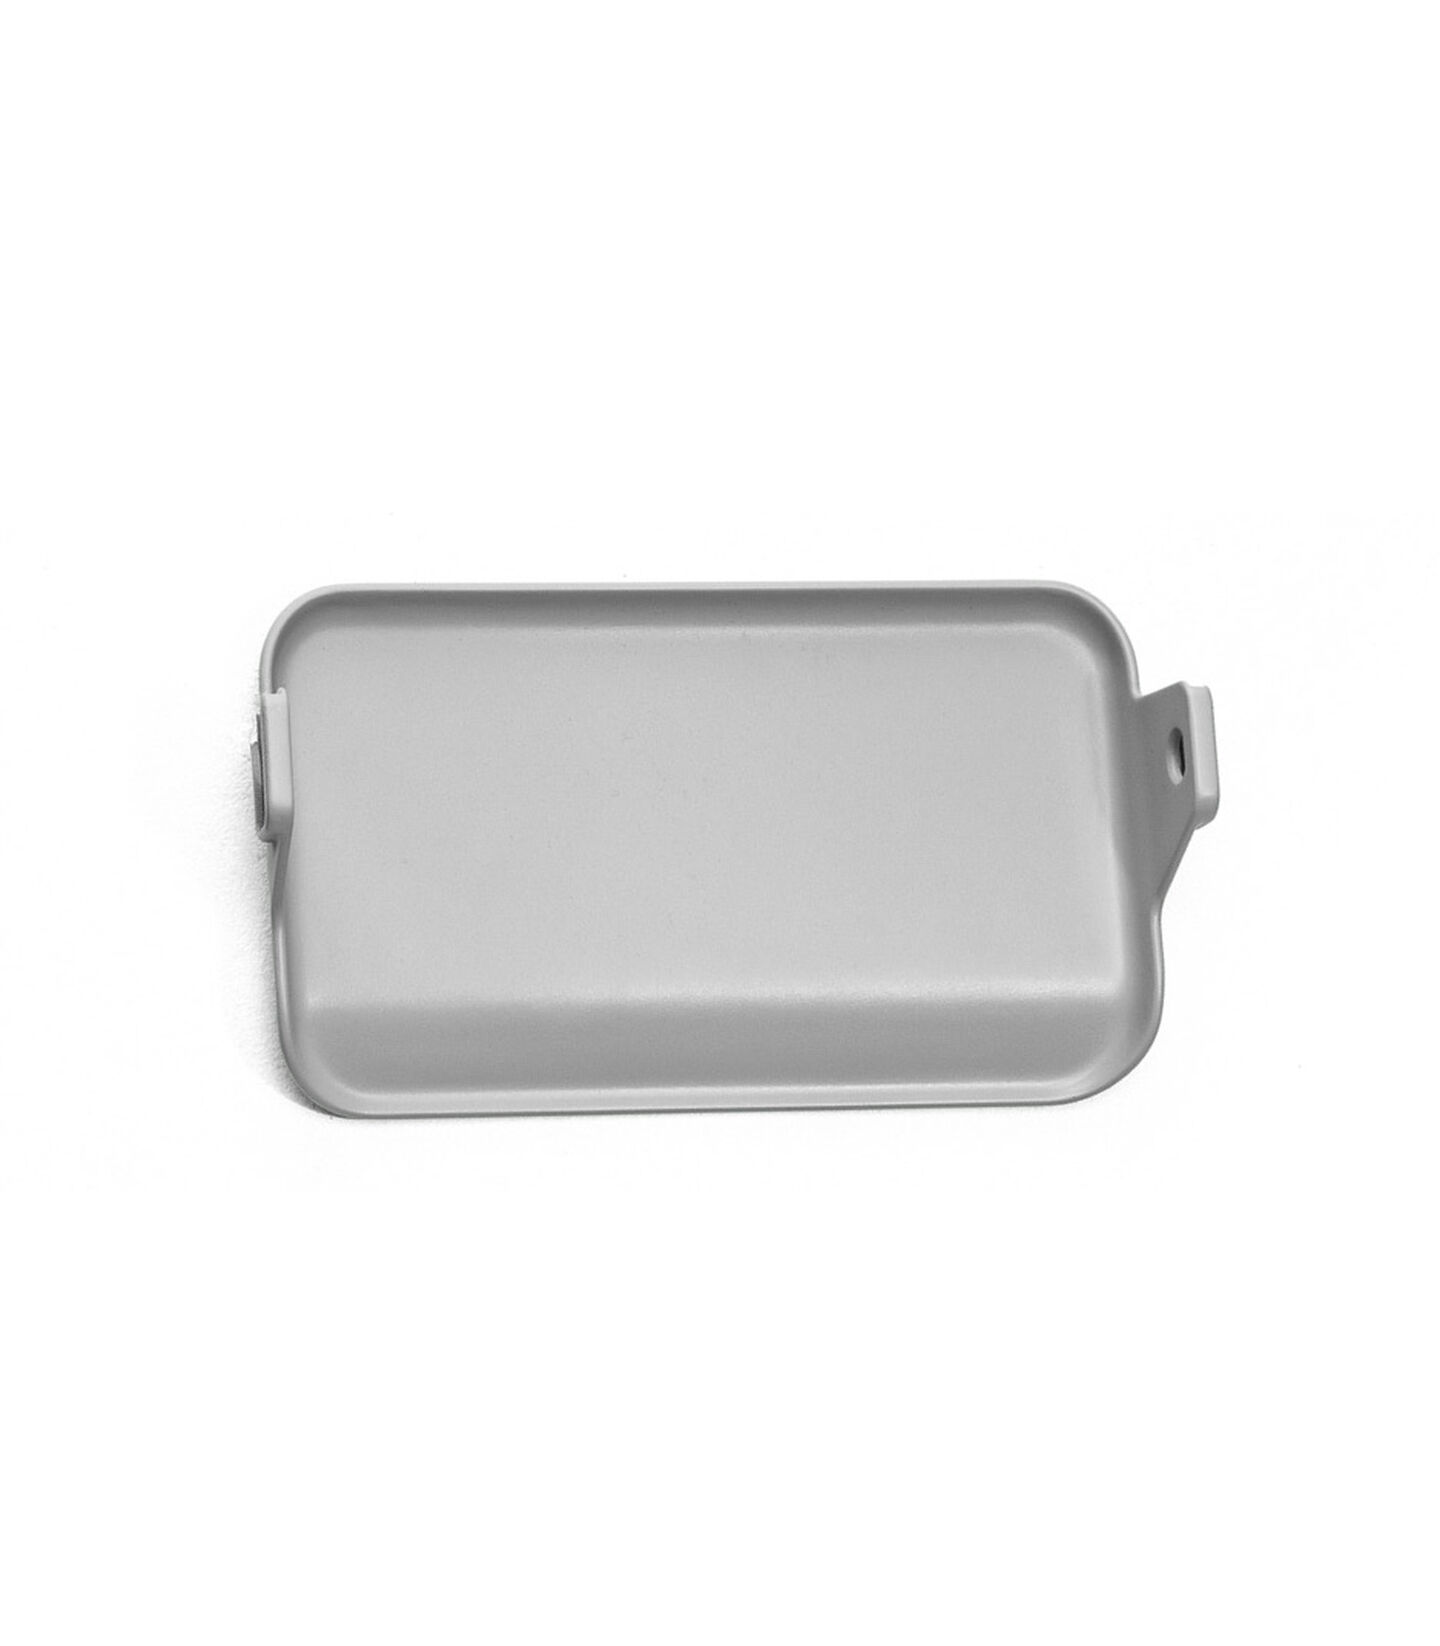 Stokke® Clikk™ Foot Plate in Cloud Grey. Available as Spare part. view 1